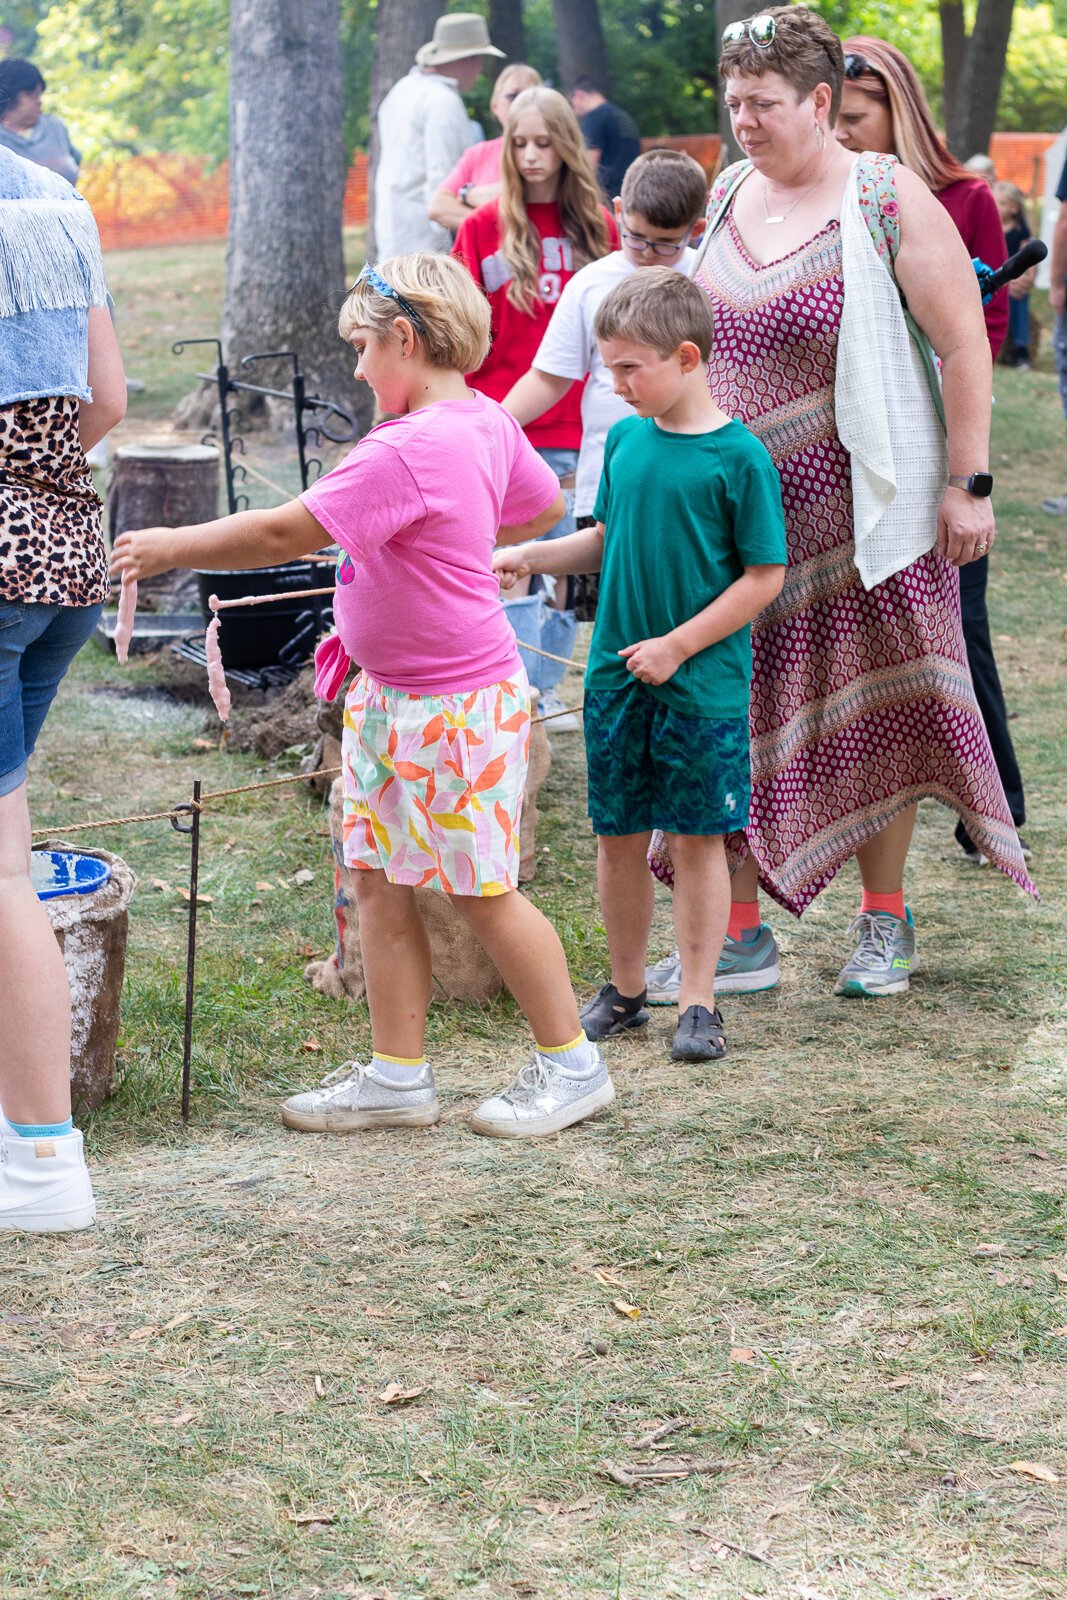 Festival attendees at a candle-making booth walk around in a circle, dipping their soon-to-be candles in wax and water repeatedly.